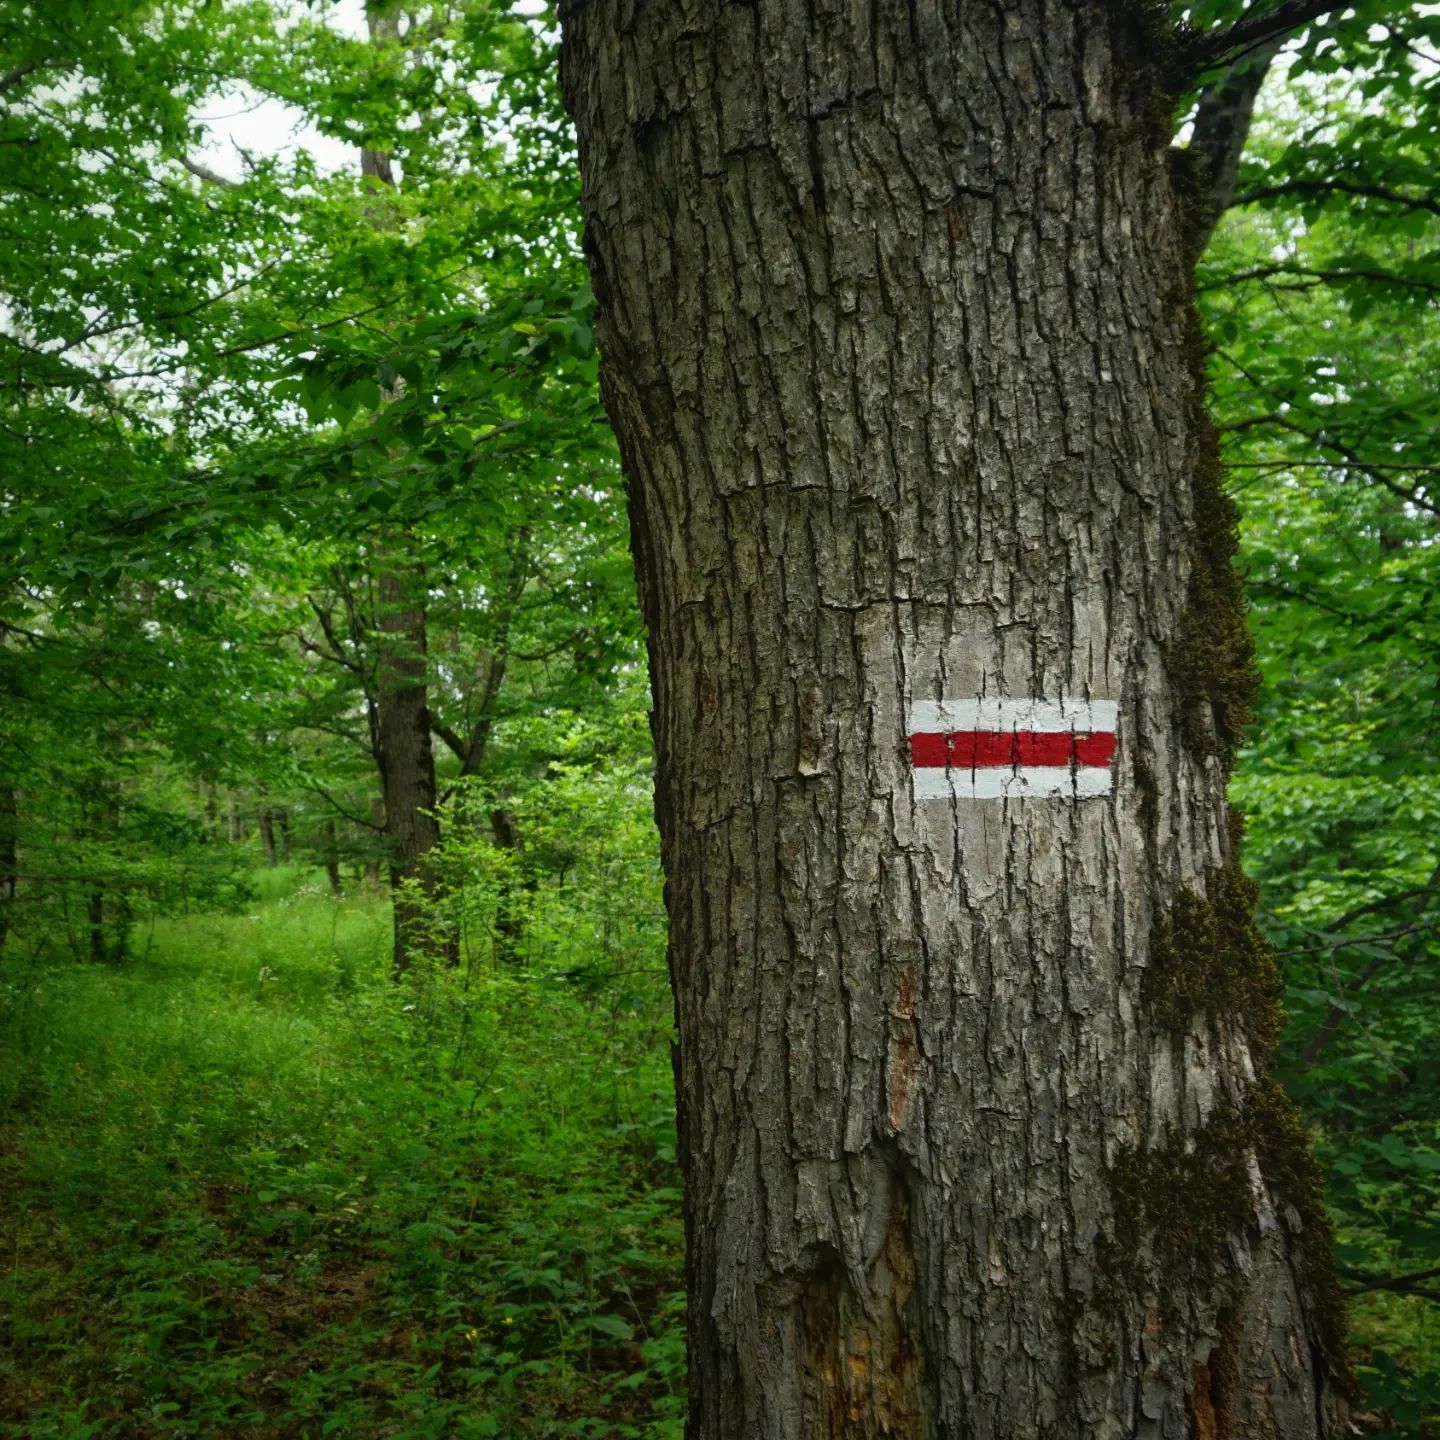 A photograph of a TCT trail blaze, consisting of white-red-white horizontal strips, on a tree.